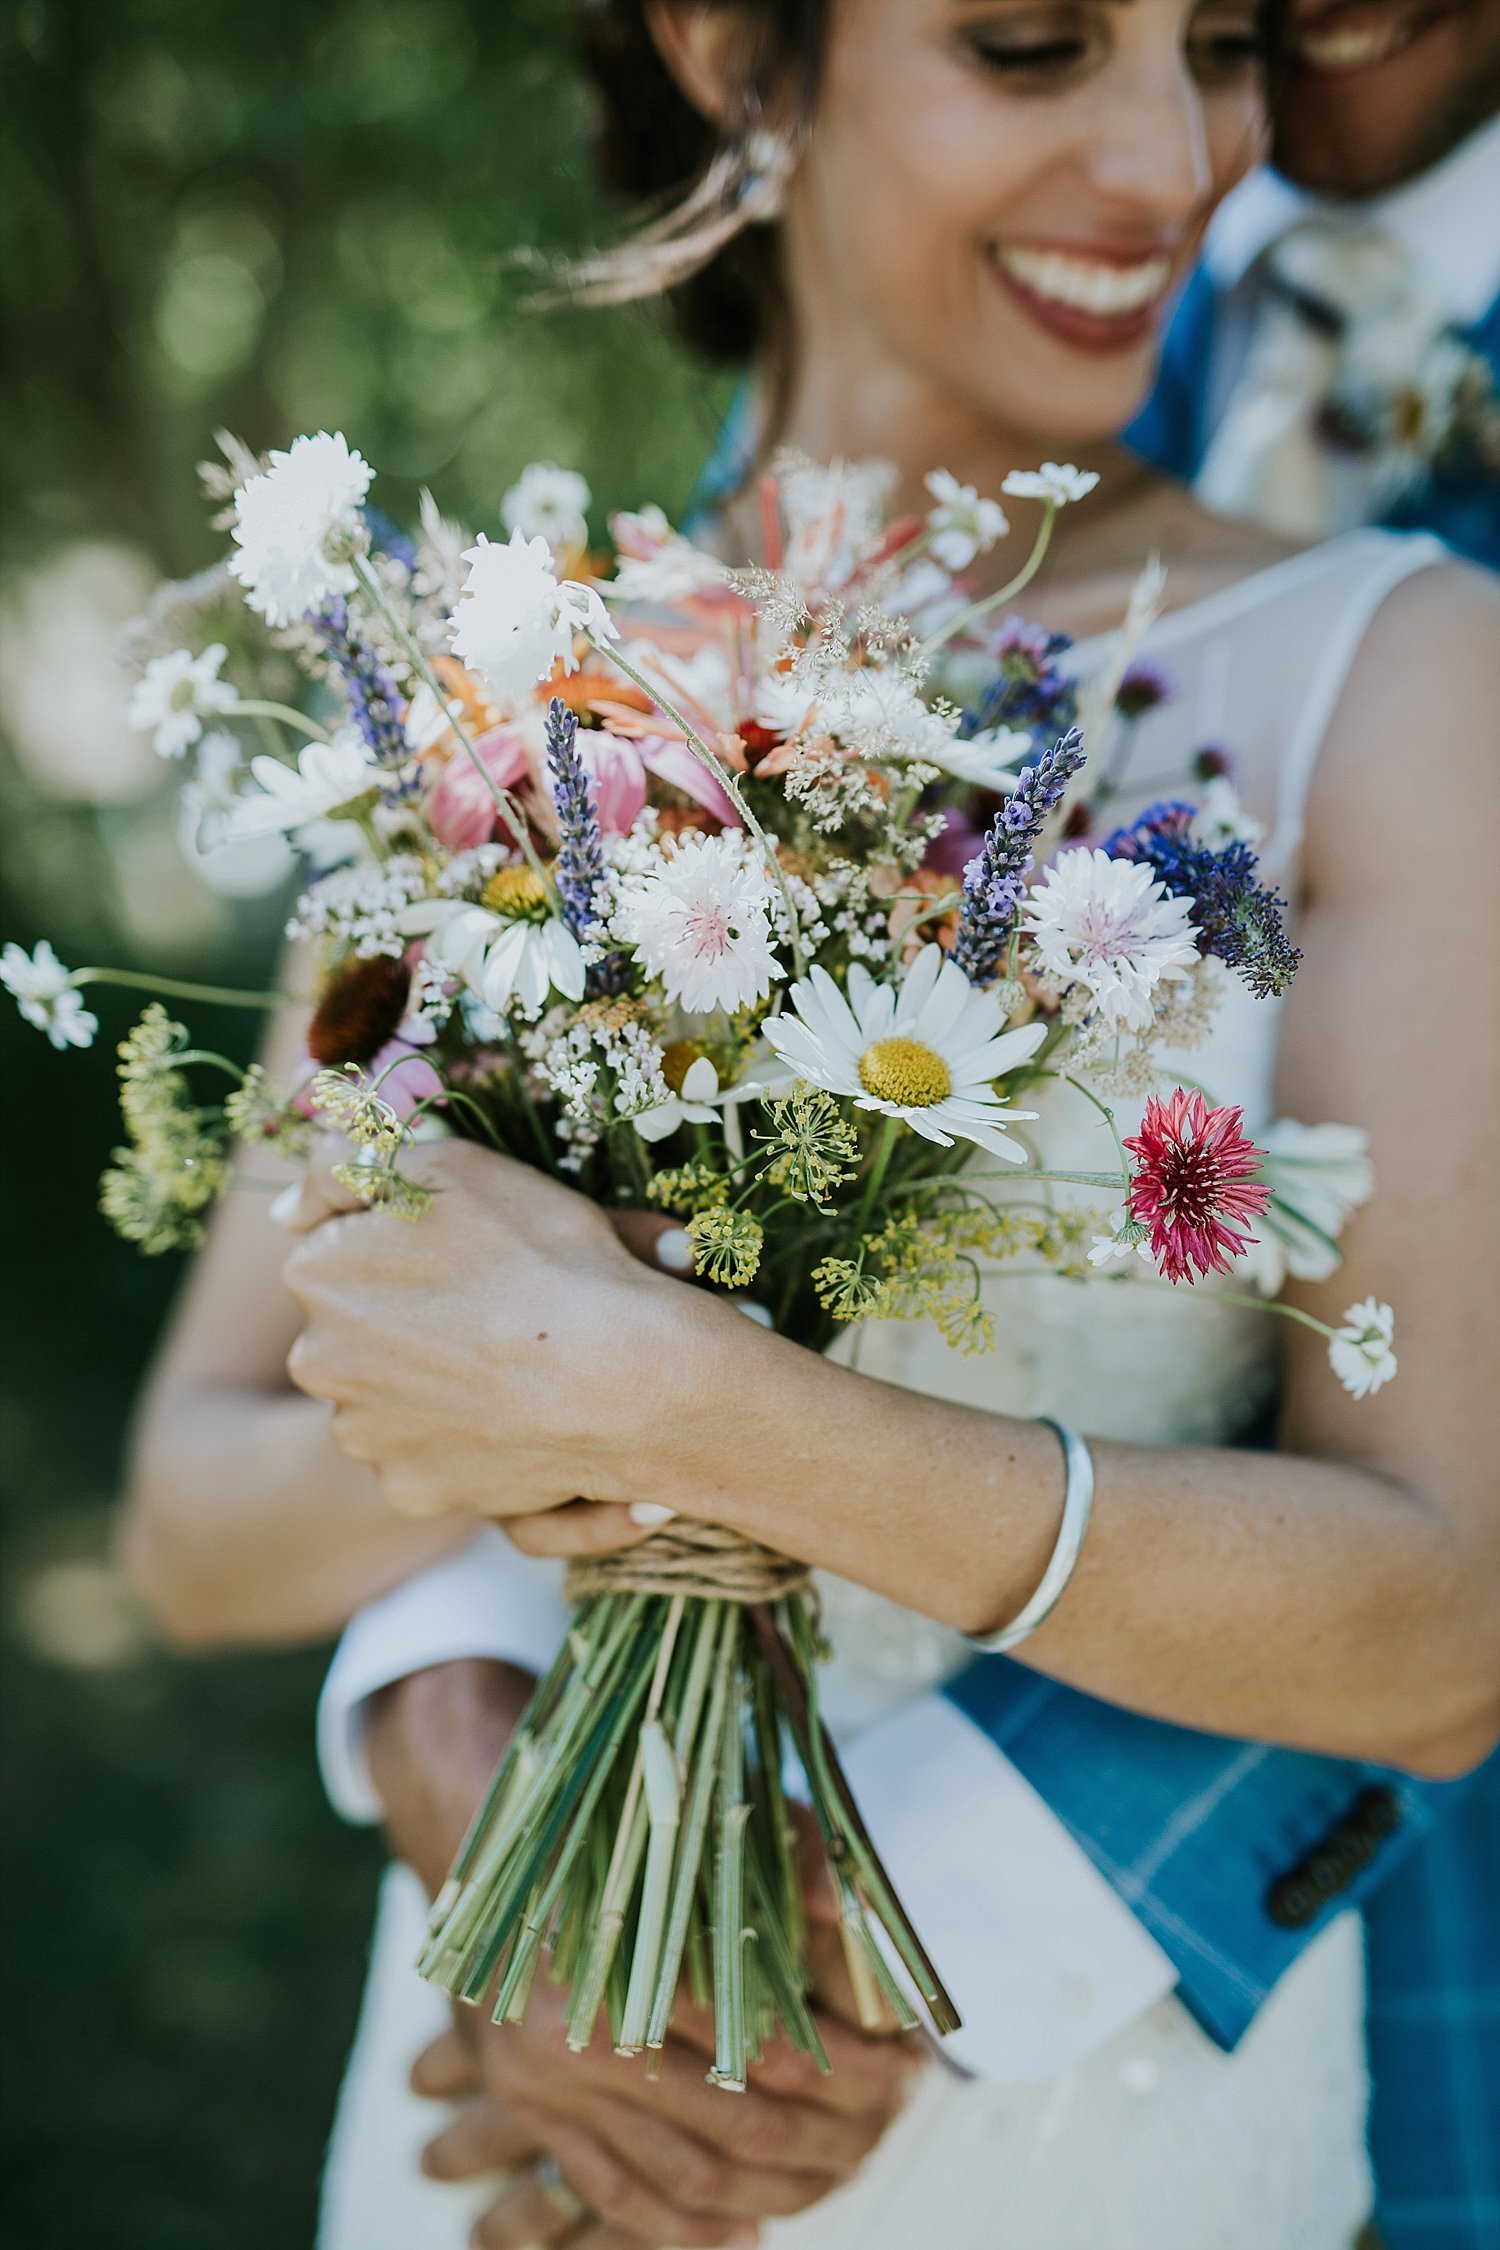 Bride and groom in embrace with flowers